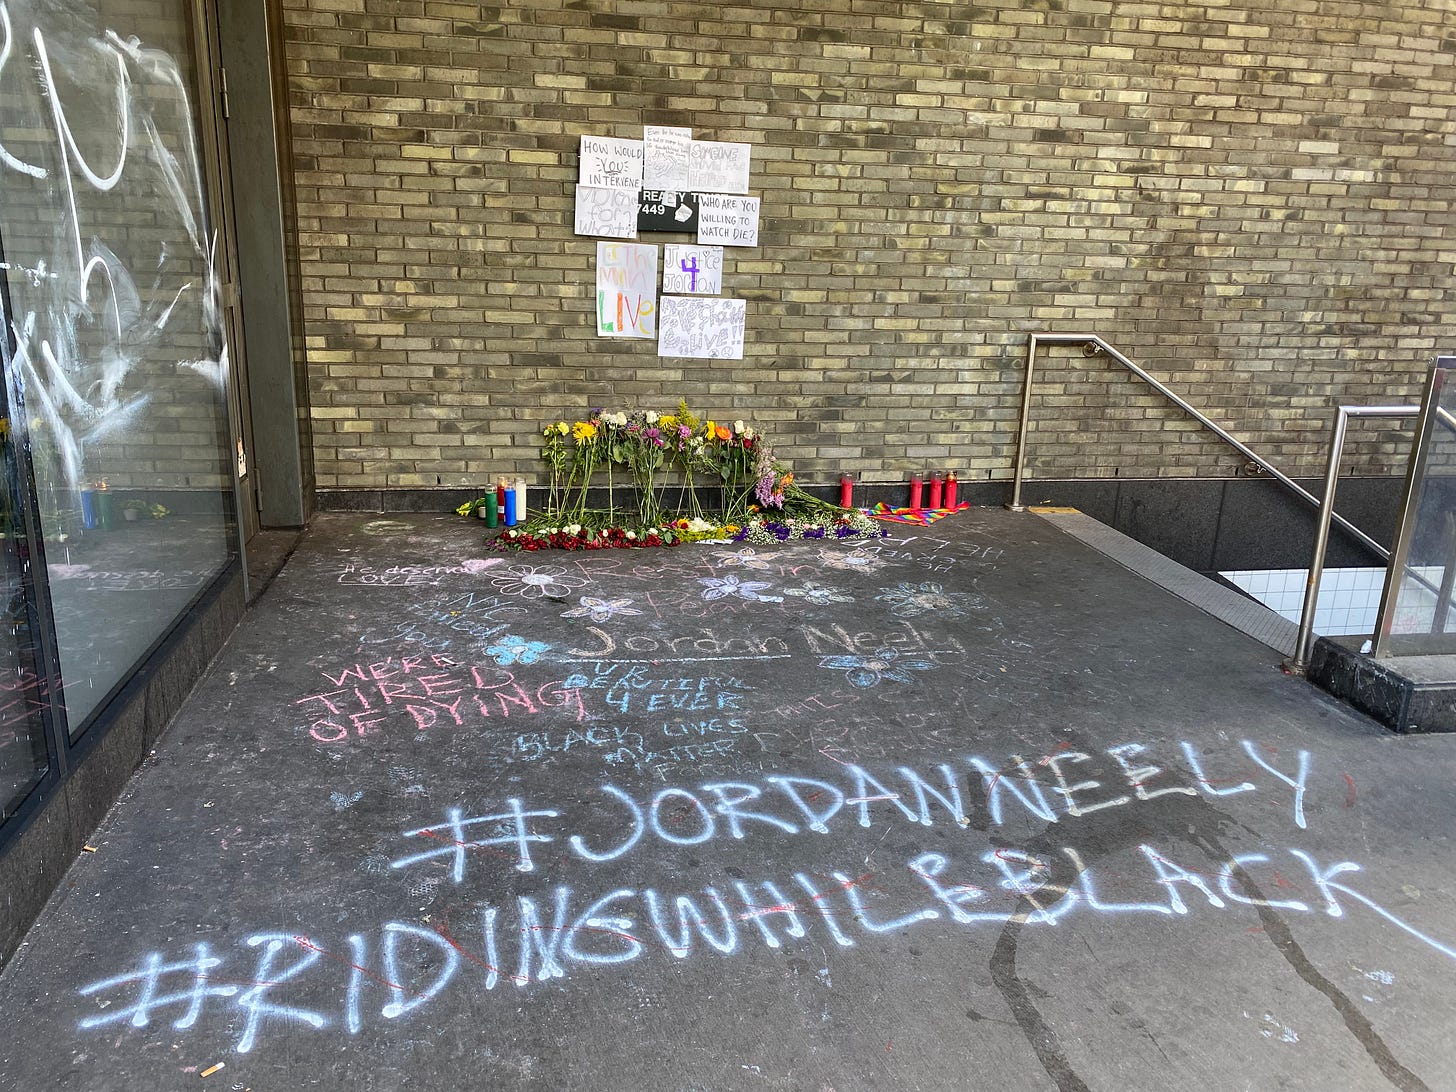 Flowers by the subway entrance where Jordan Neely died.